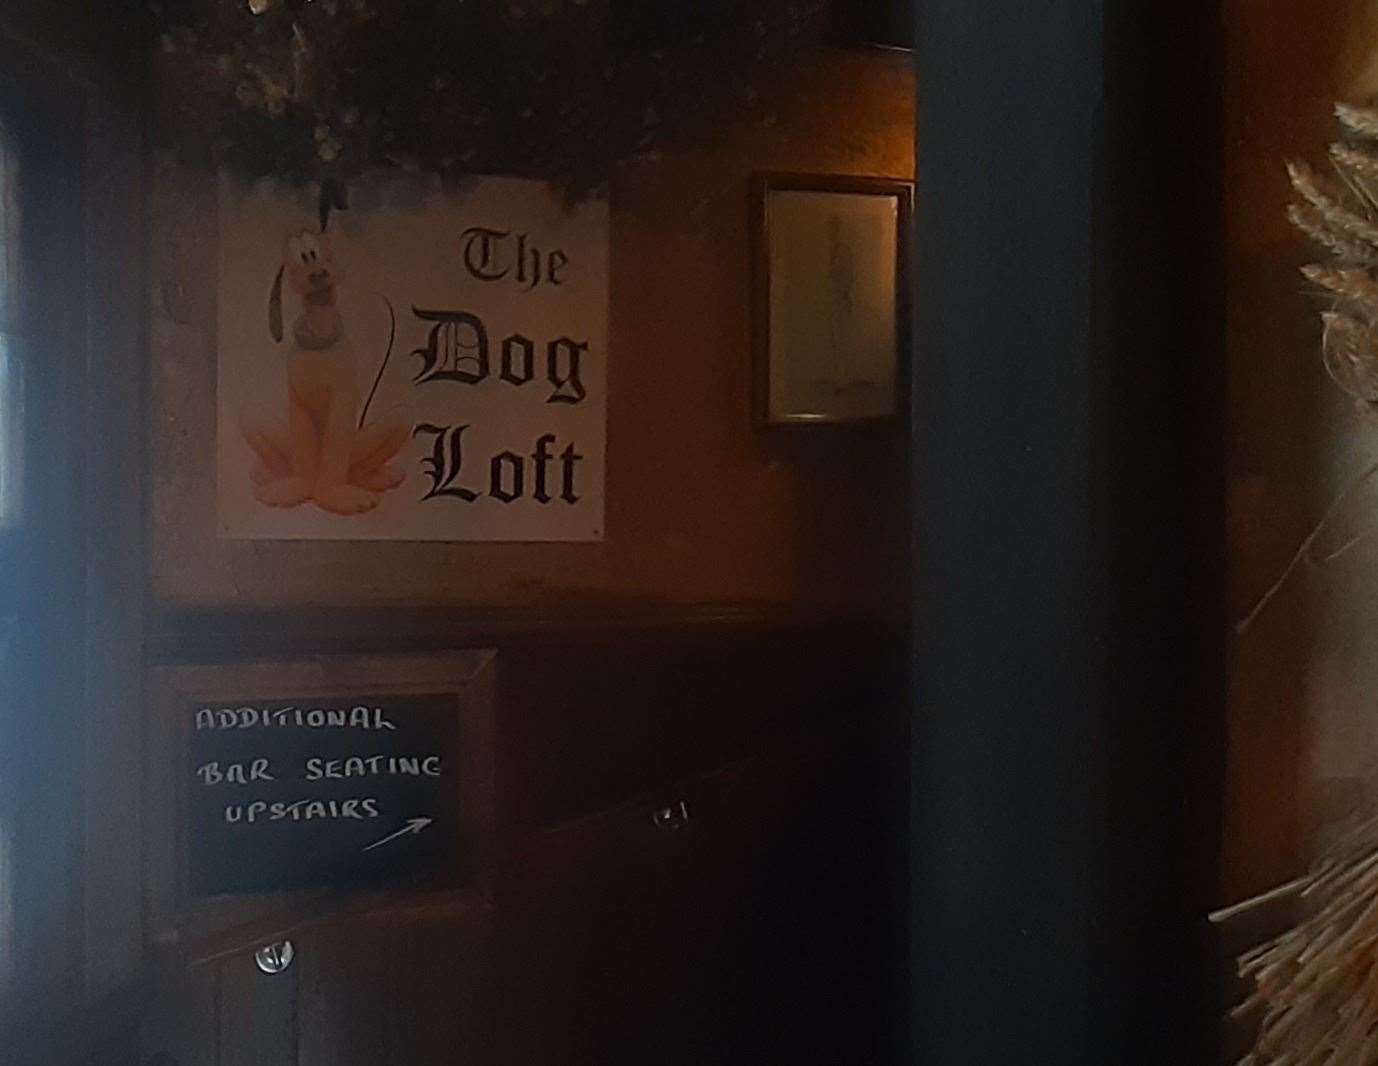 The dog loft is a newer addition to the 18th century pub